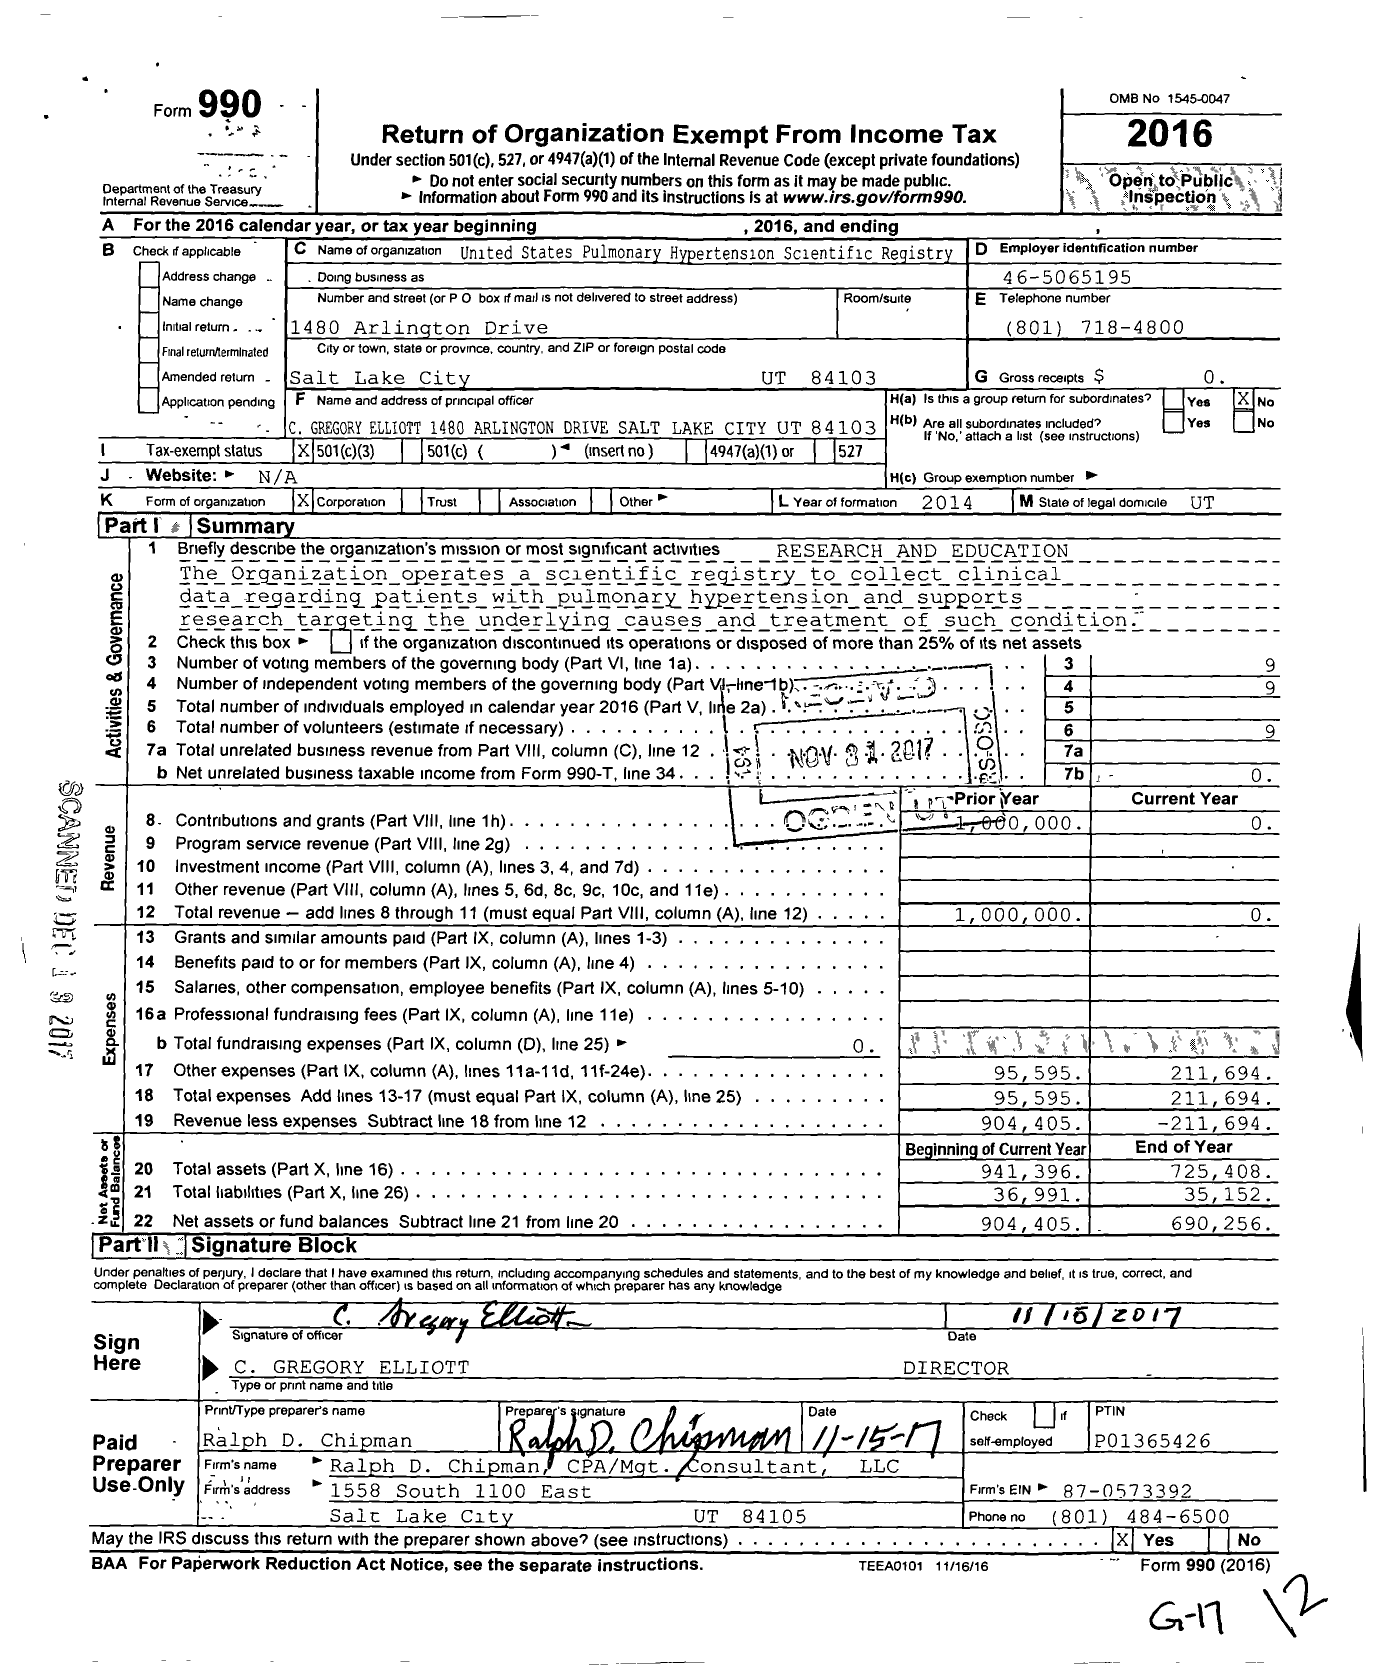 Image of first page of 2016 Form 990 for United States Pulmonary Hypertension Scientific Registry